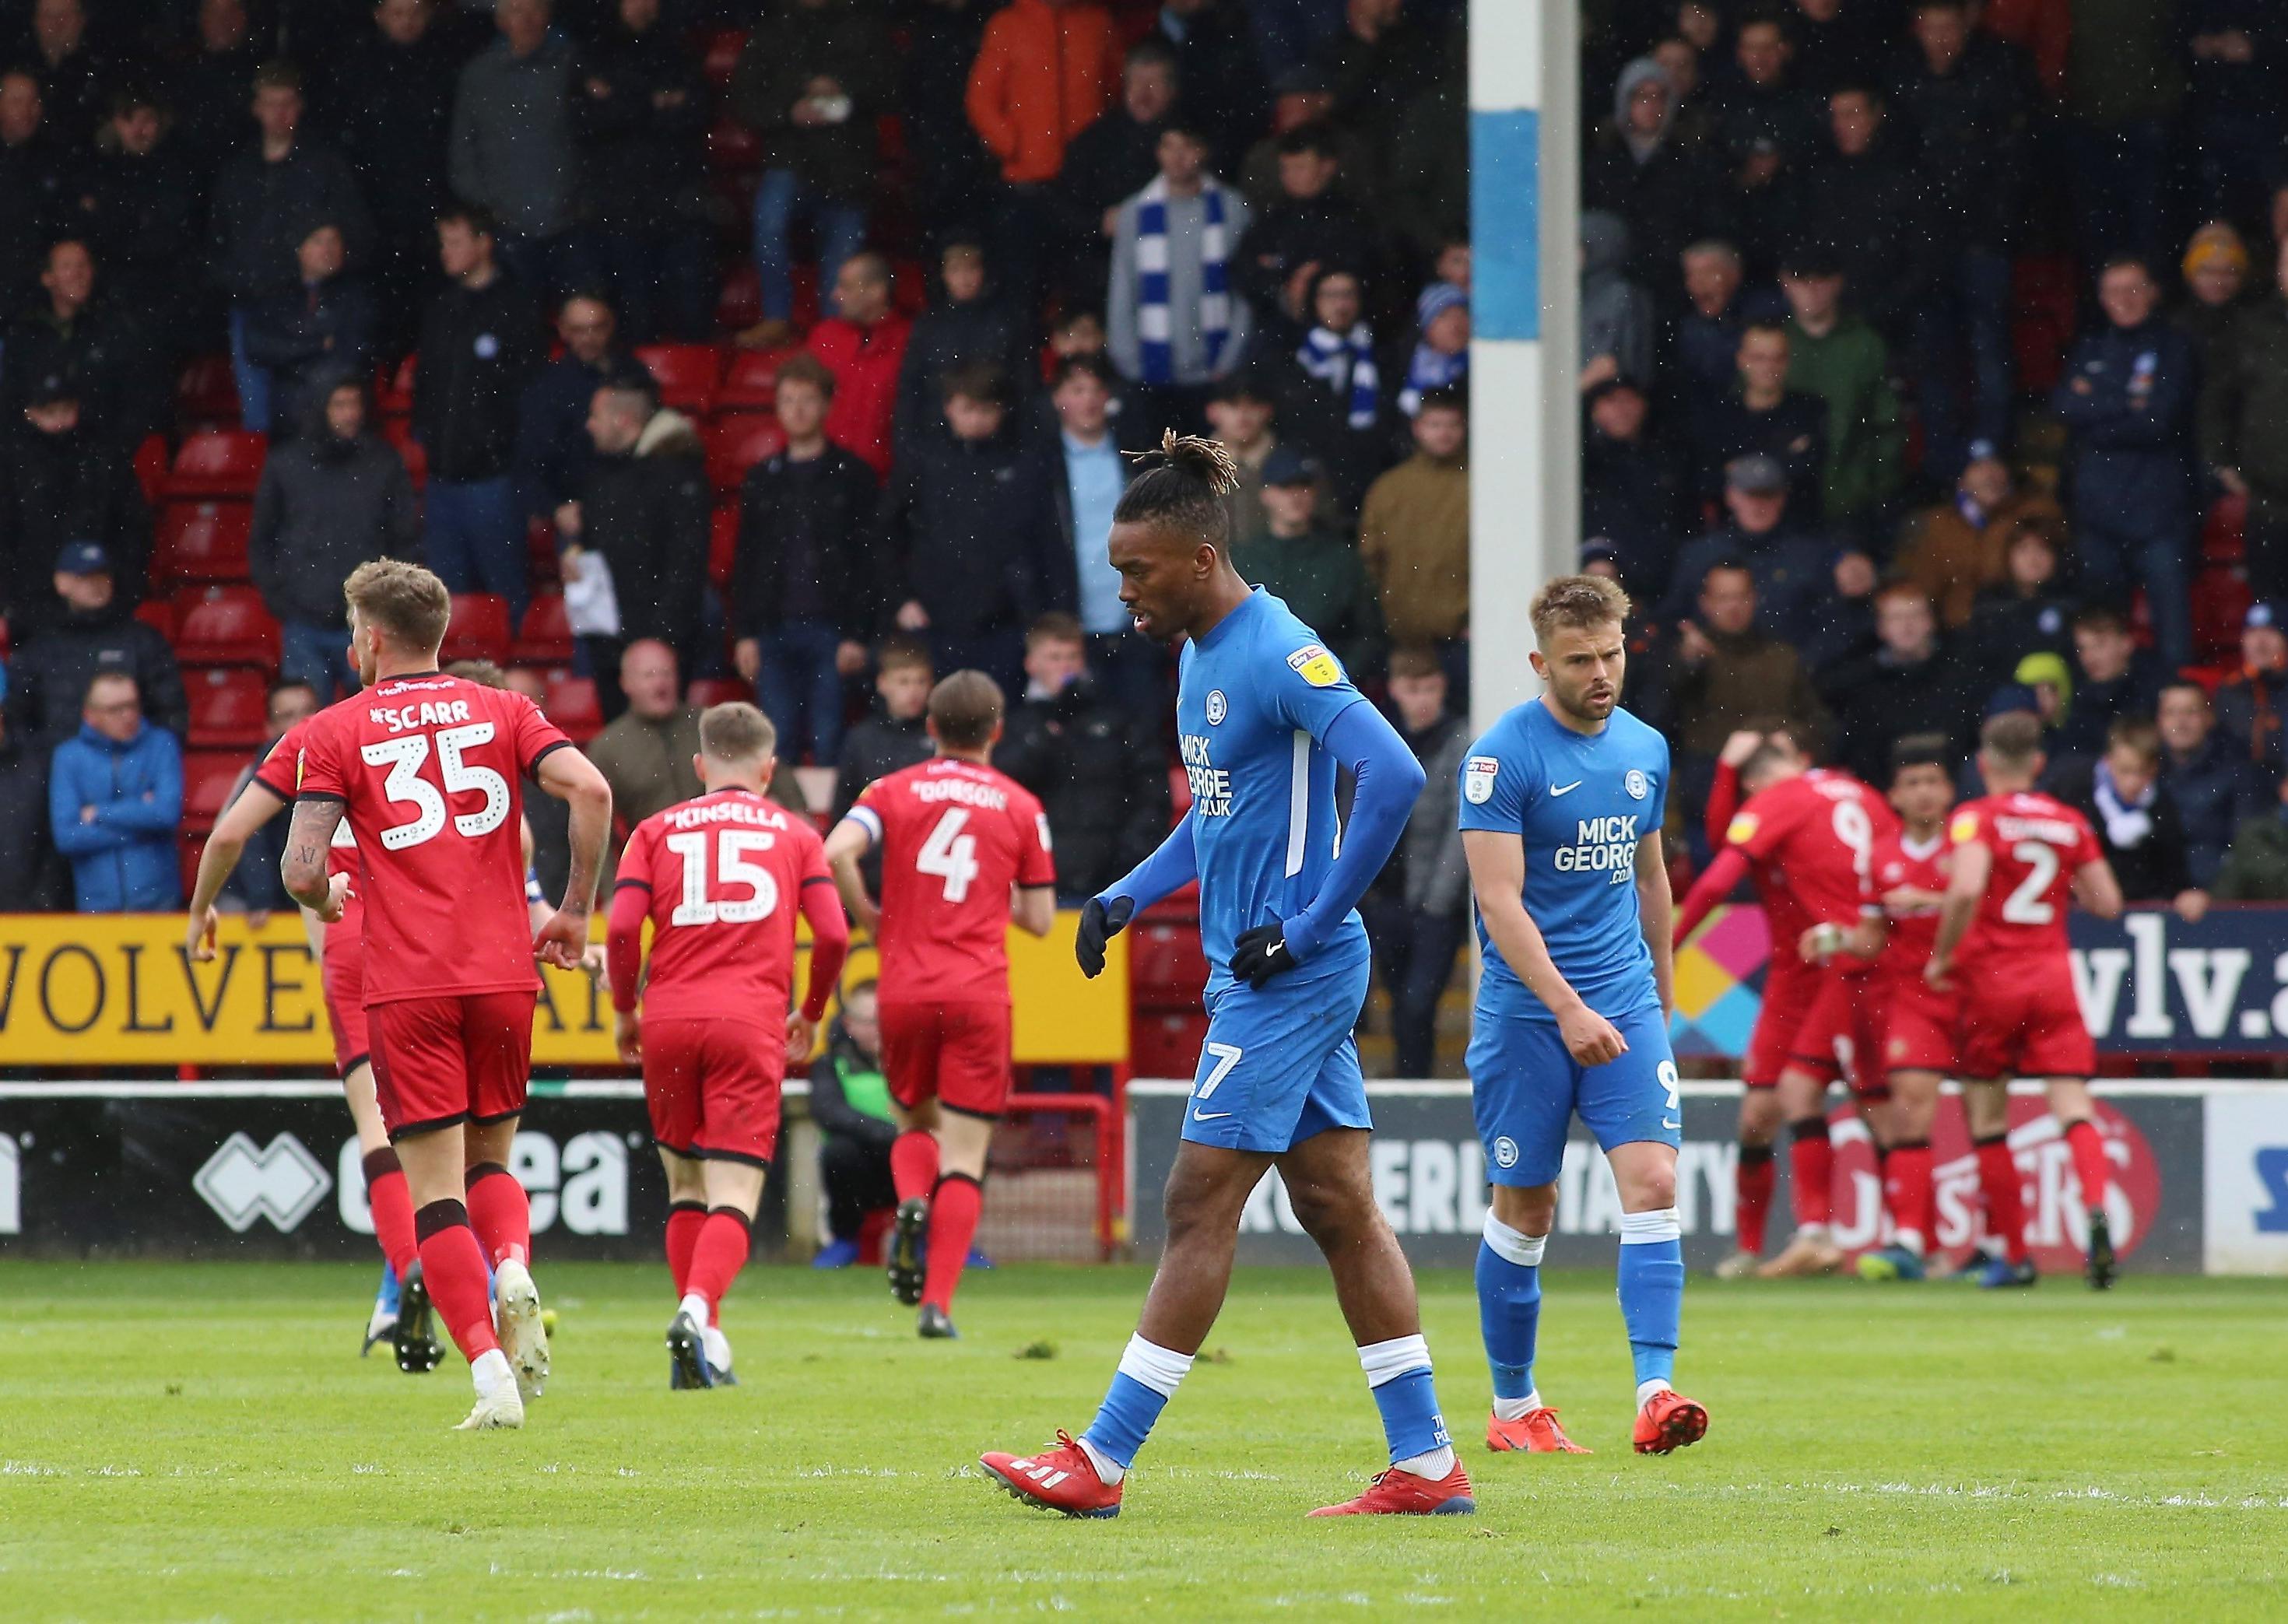 The worst Posh performance of the 2019 came at Walsall four days before the Pompey game when the relegation-bound Saddlers thumped Darren Ferguson's side 3-0.